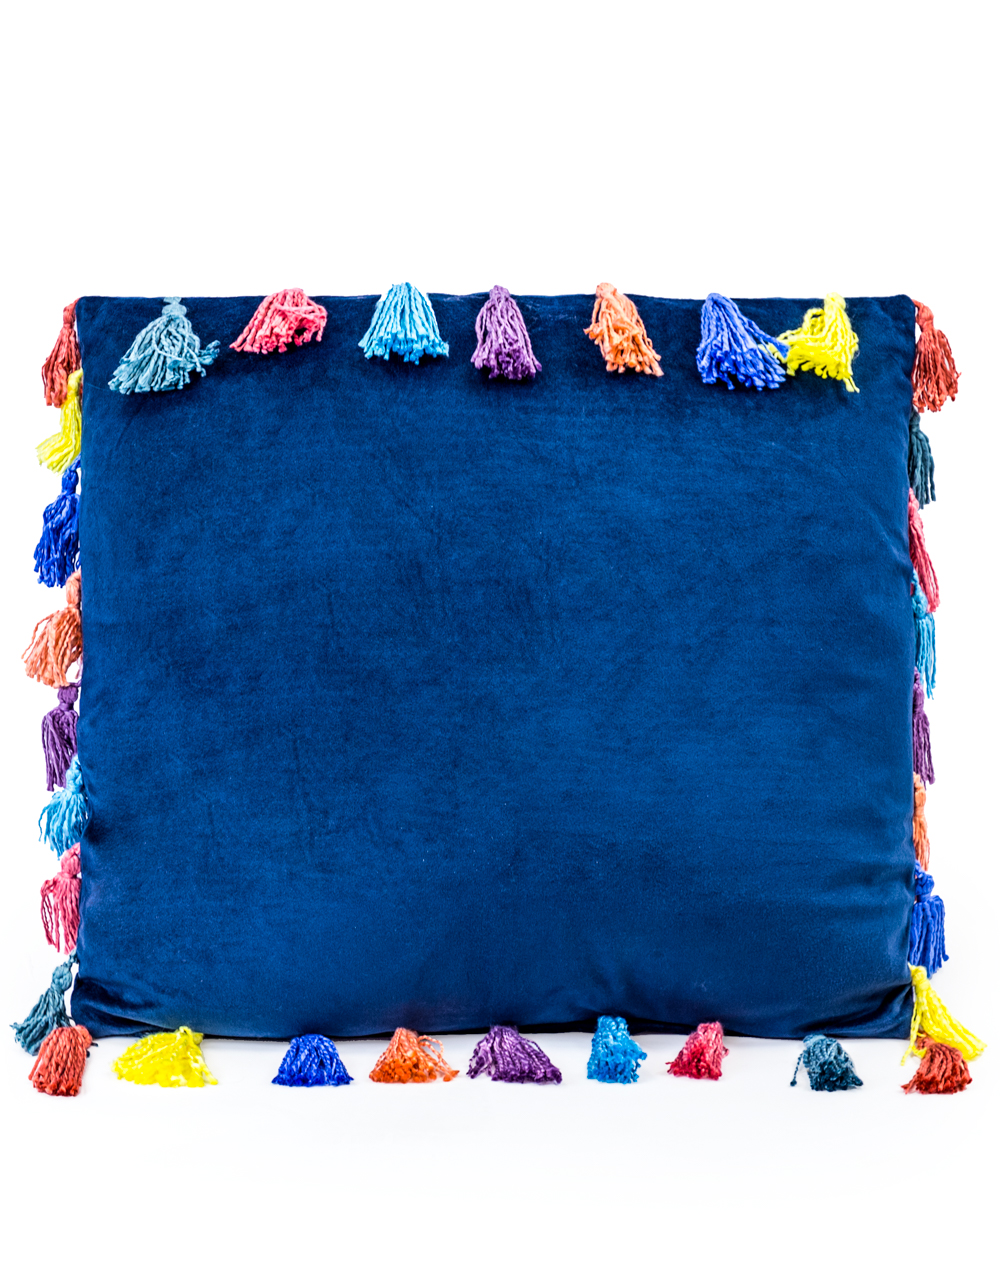 &Quirky Large Navy Blue Square Velvet Cushion with Tassels